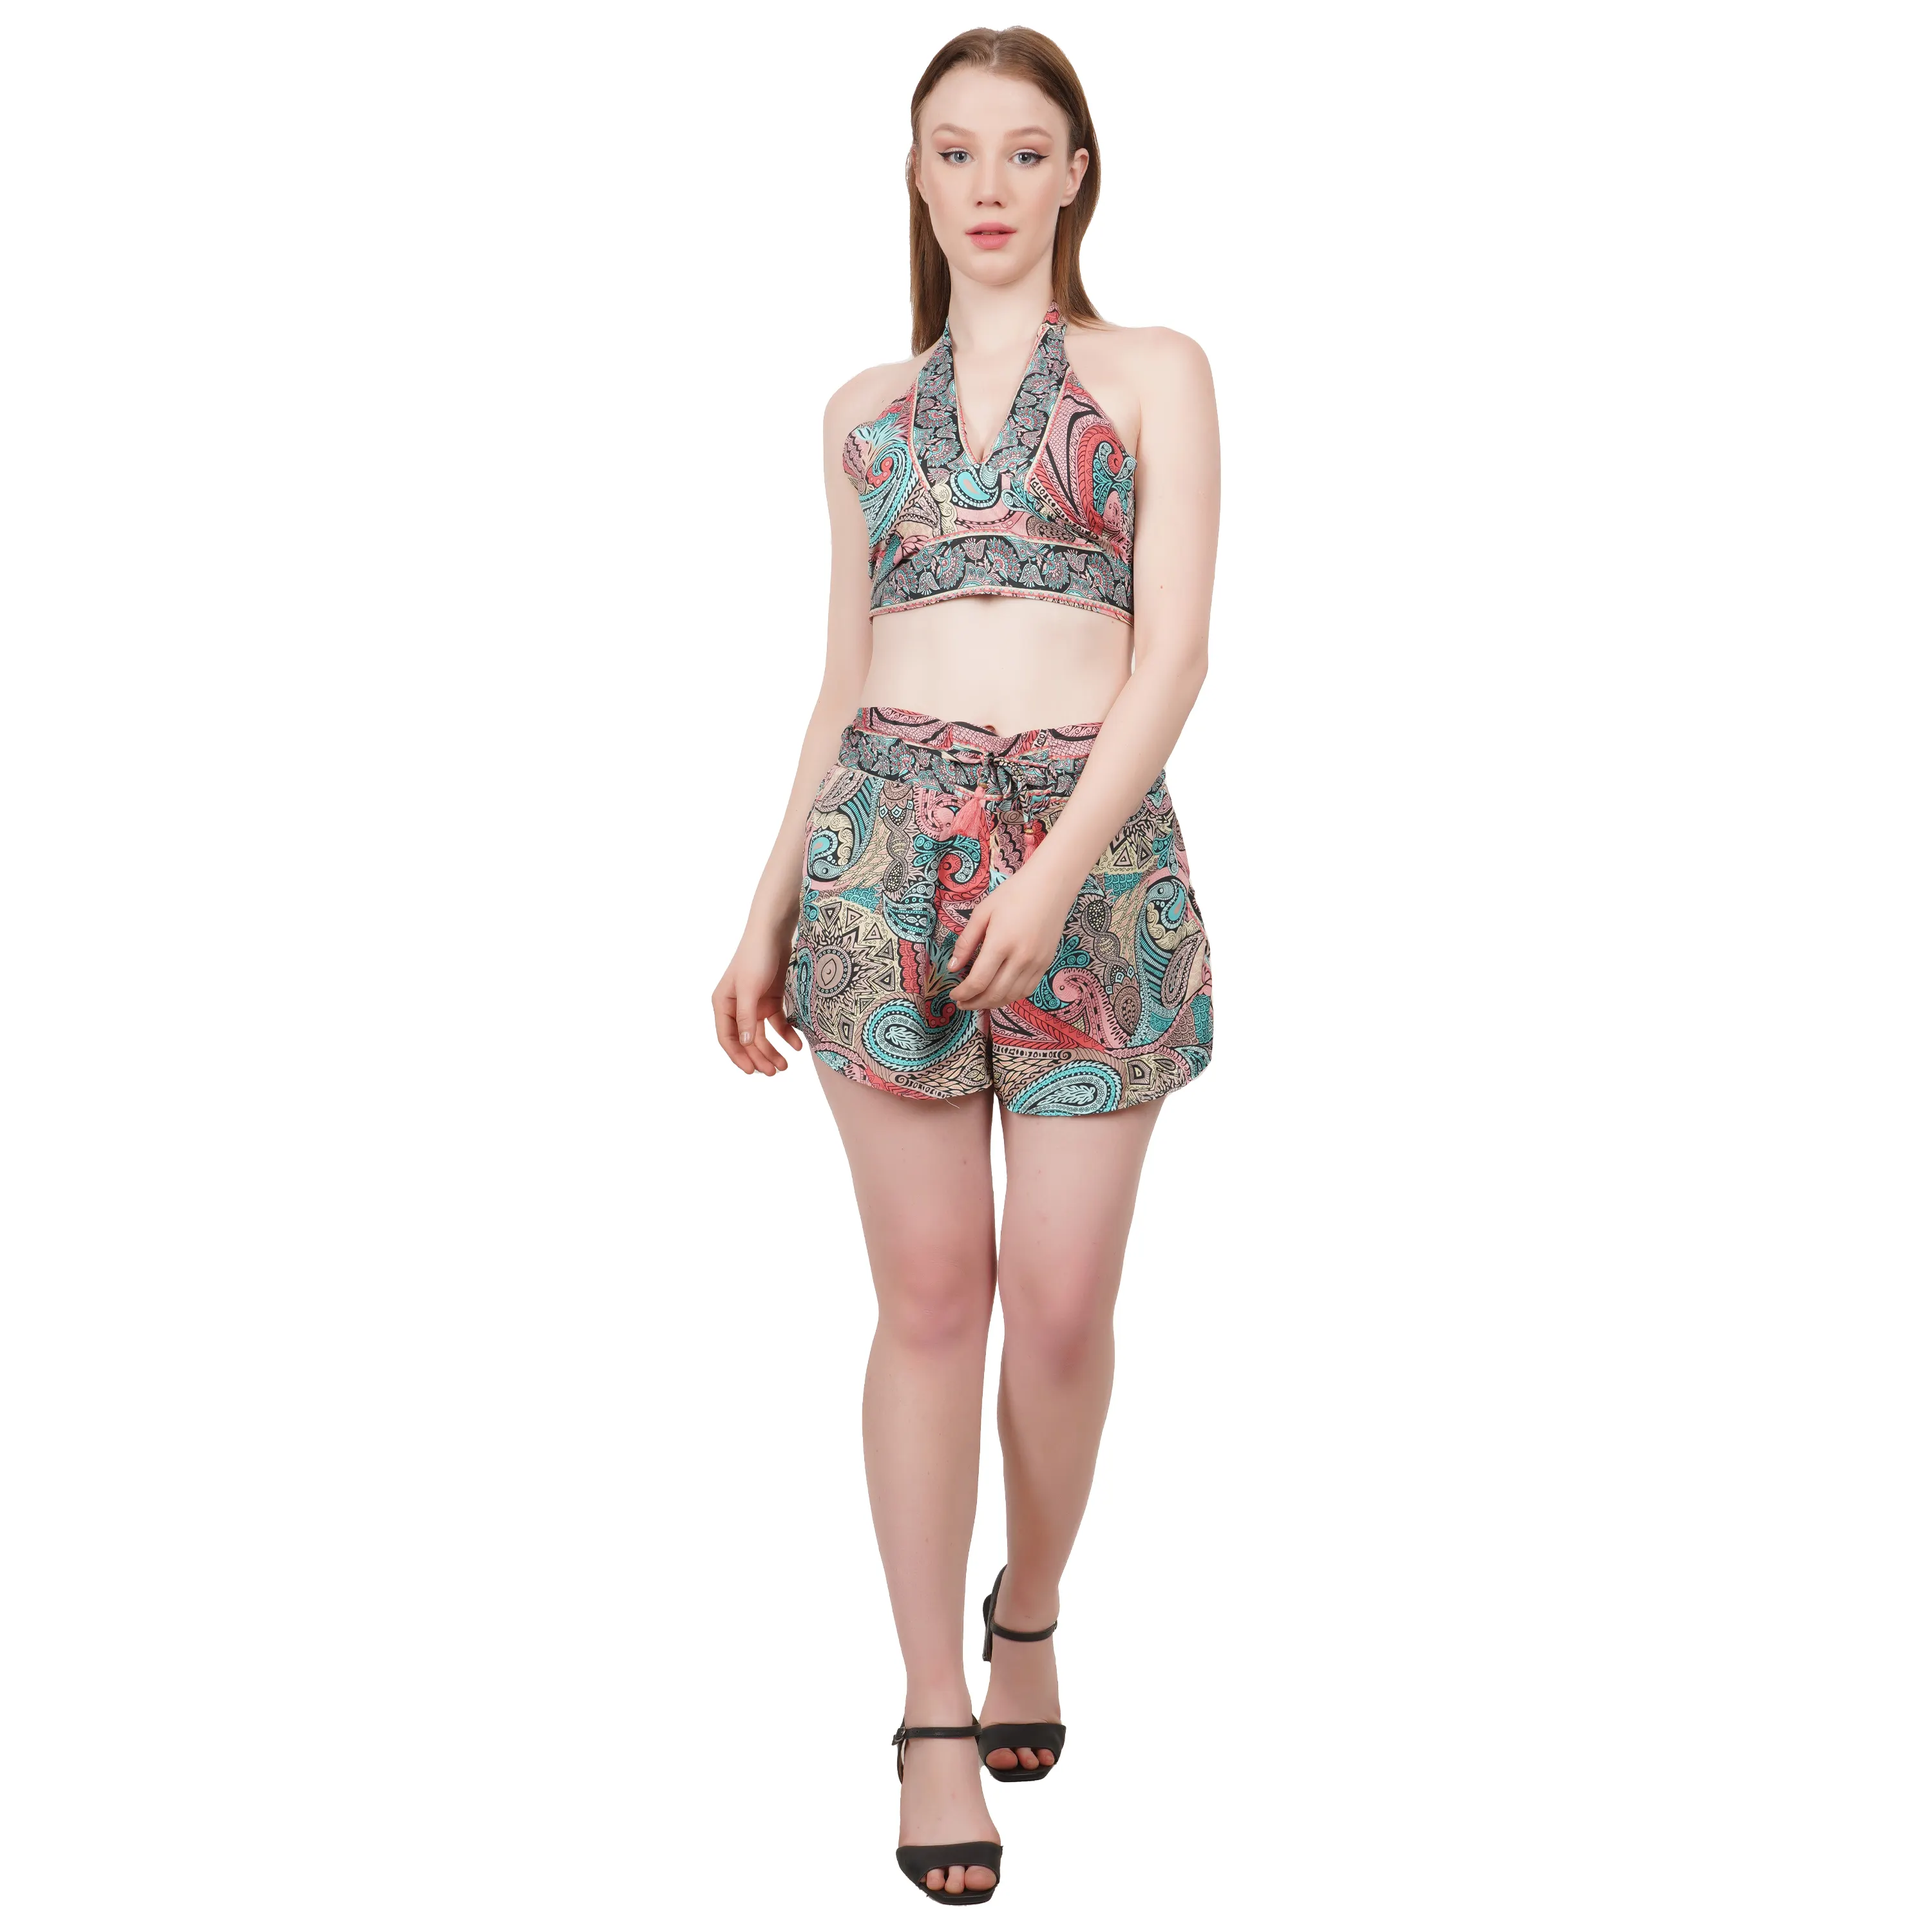 Best Offers Modern Designed Warp Top with Short Set with Floral Designed Pattern For Beach Wearing Dress